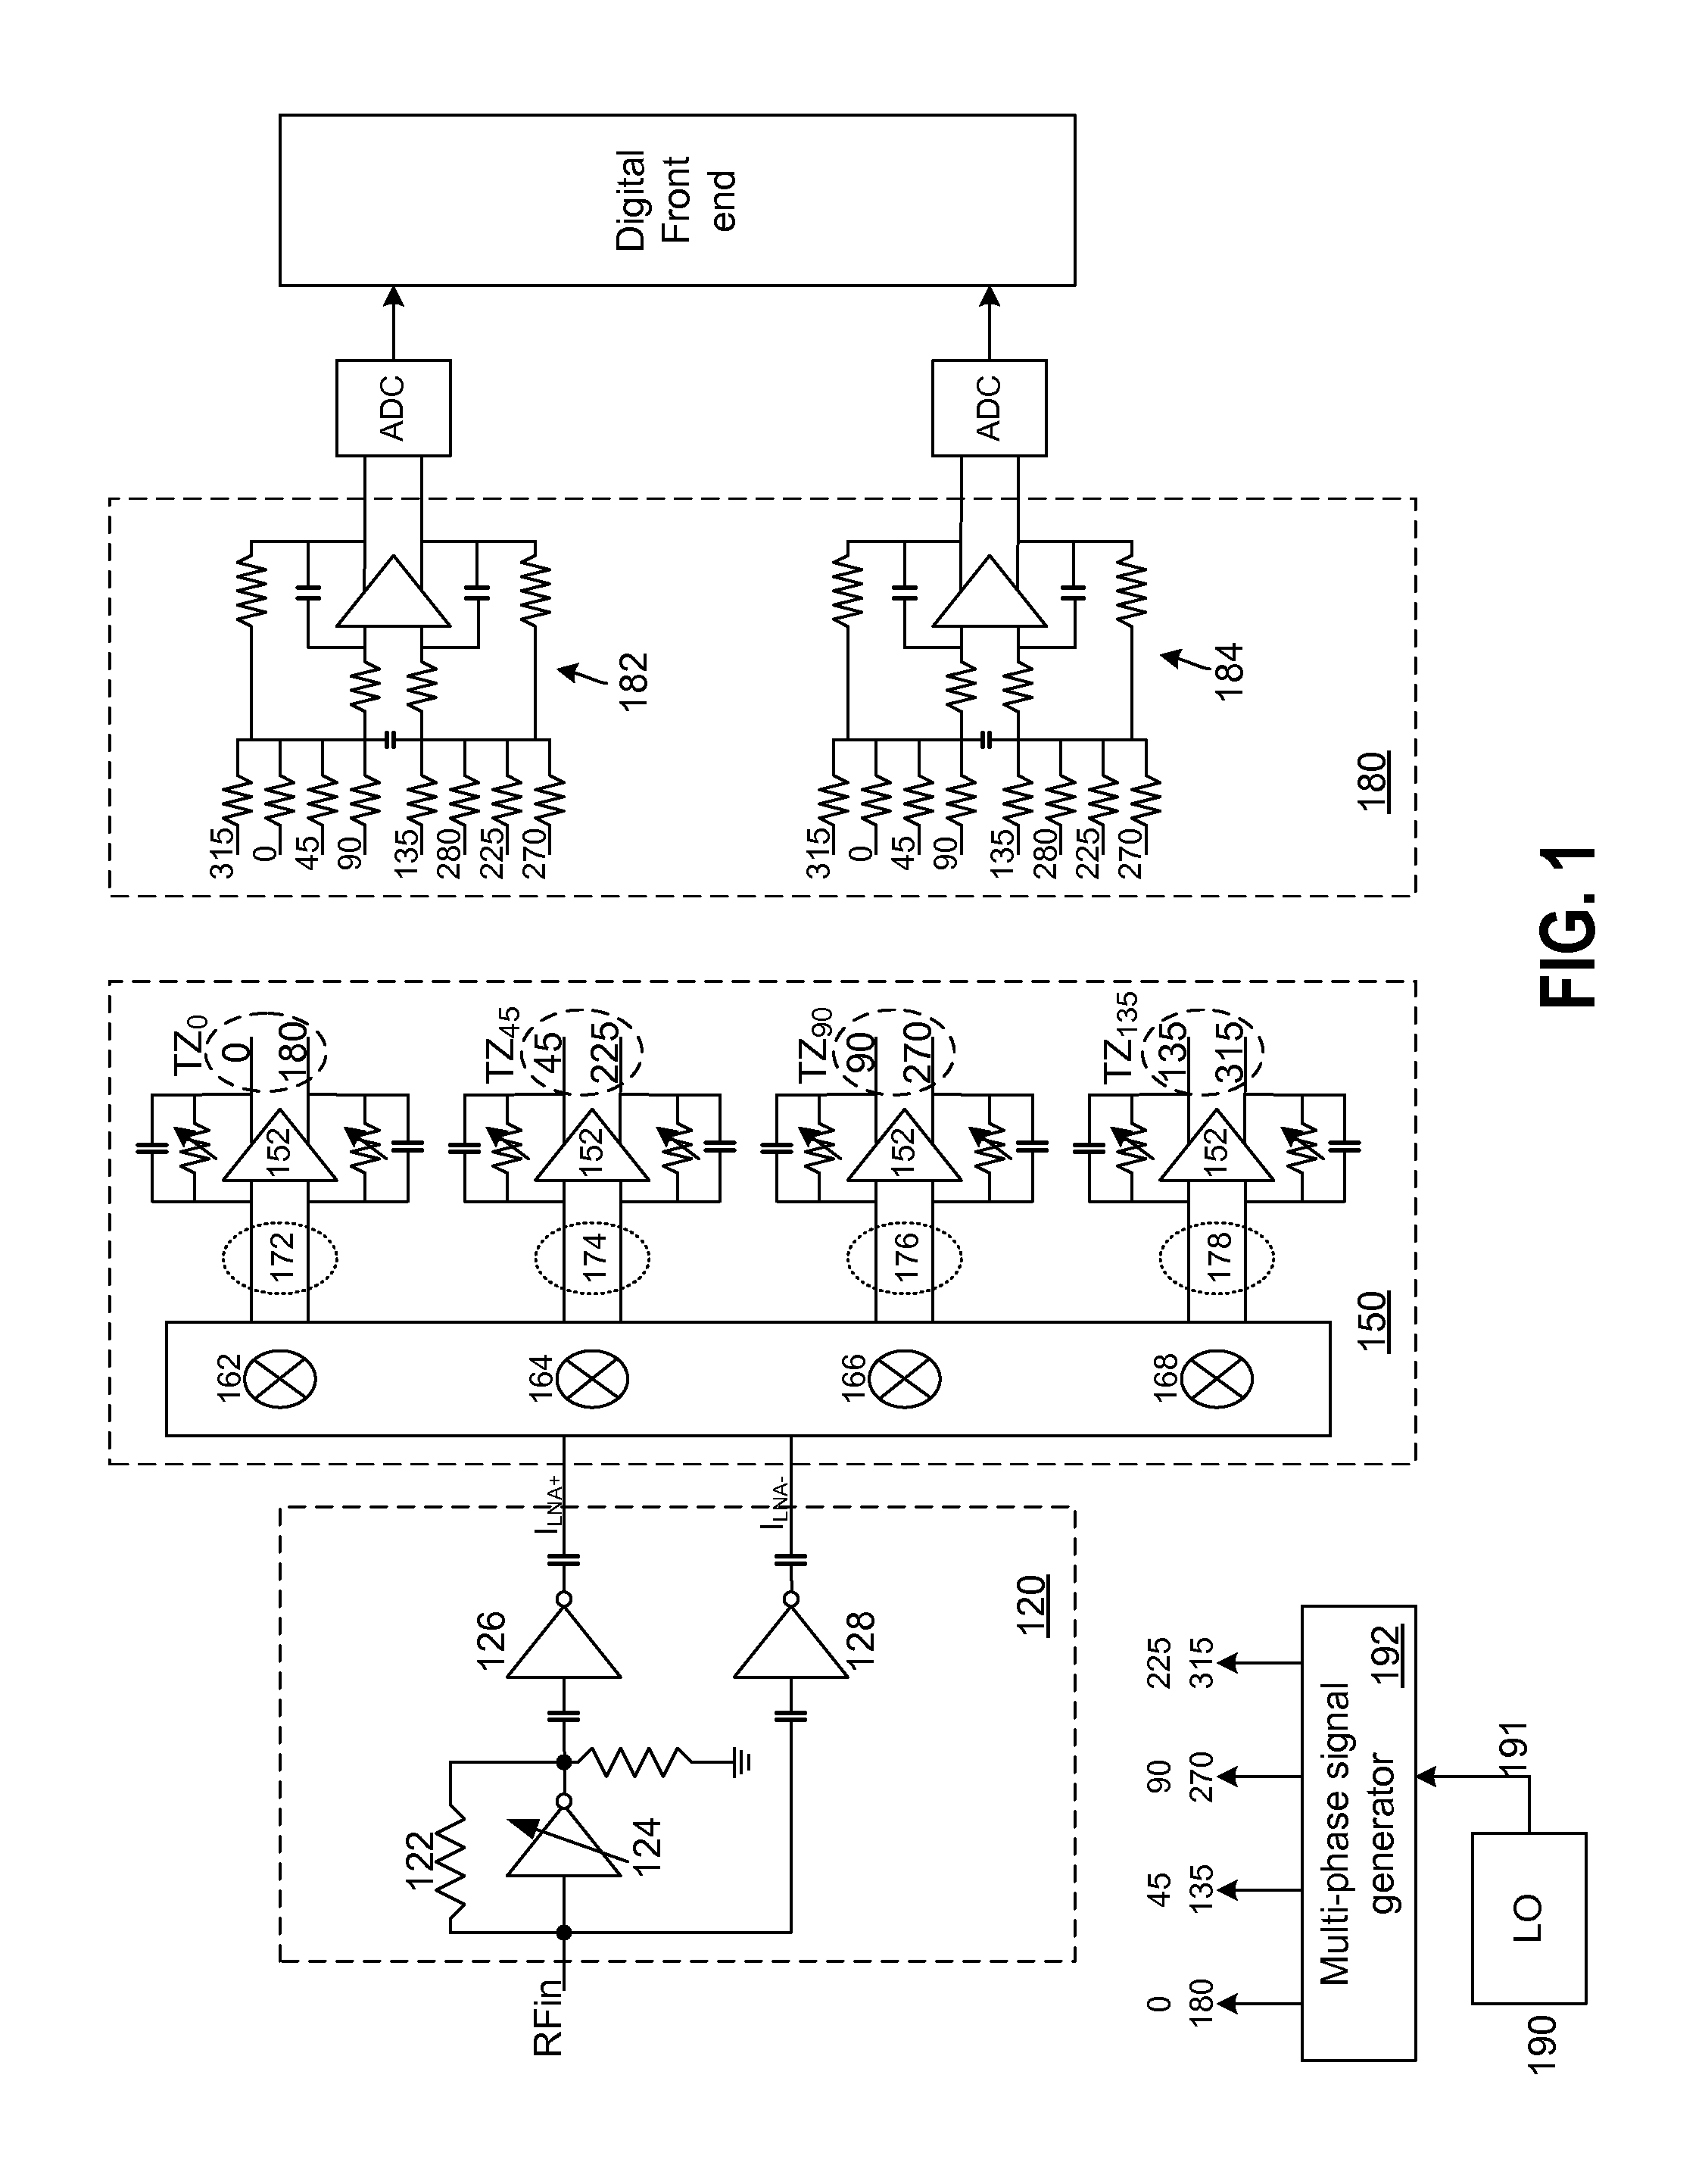 High dynamic range radio architecture with enhanced image rejection